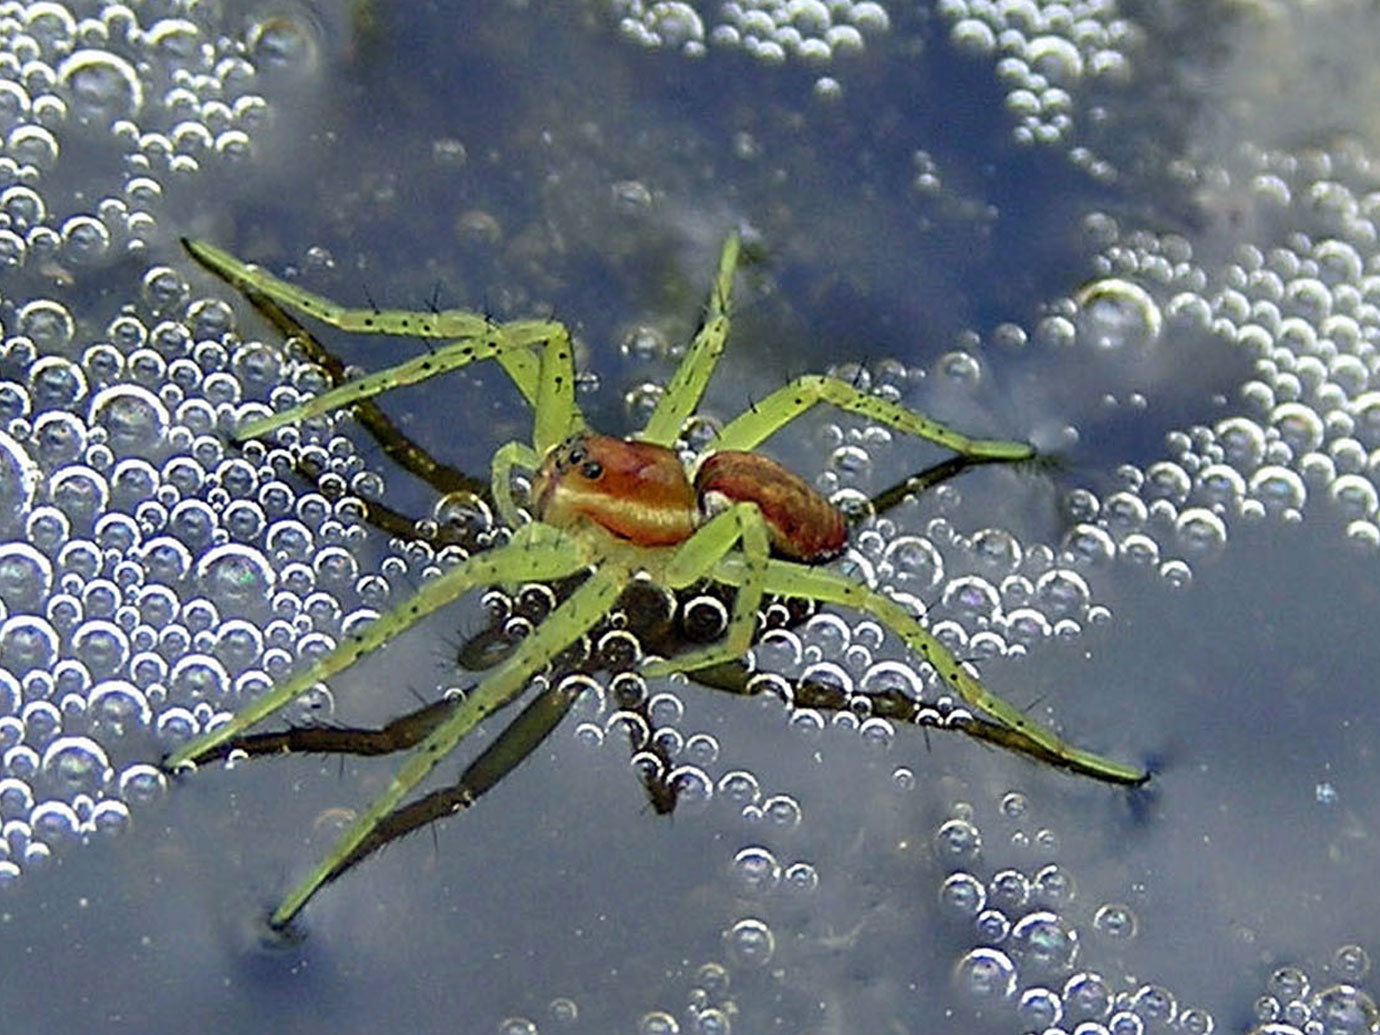 Dolomedes fimbriatus spiderling with green legs